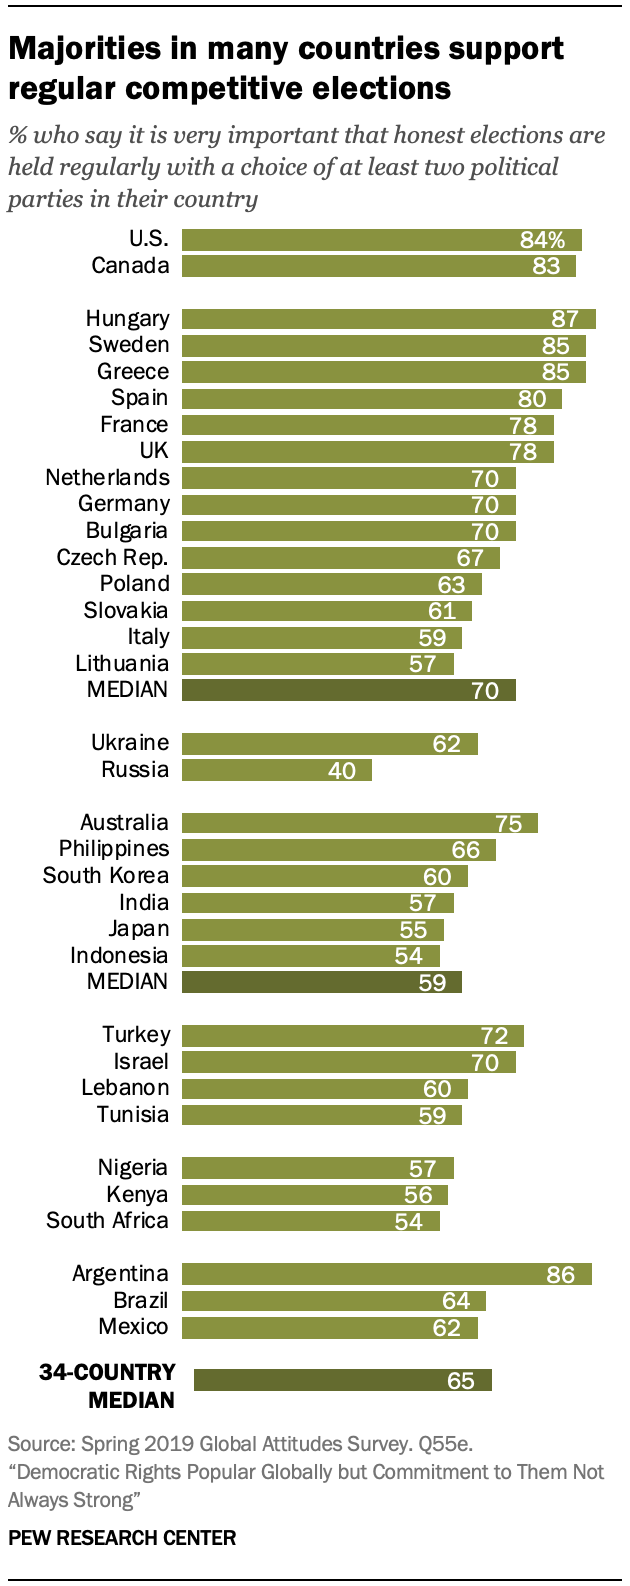 Chart shows majorities in many countries support regular competitive elections